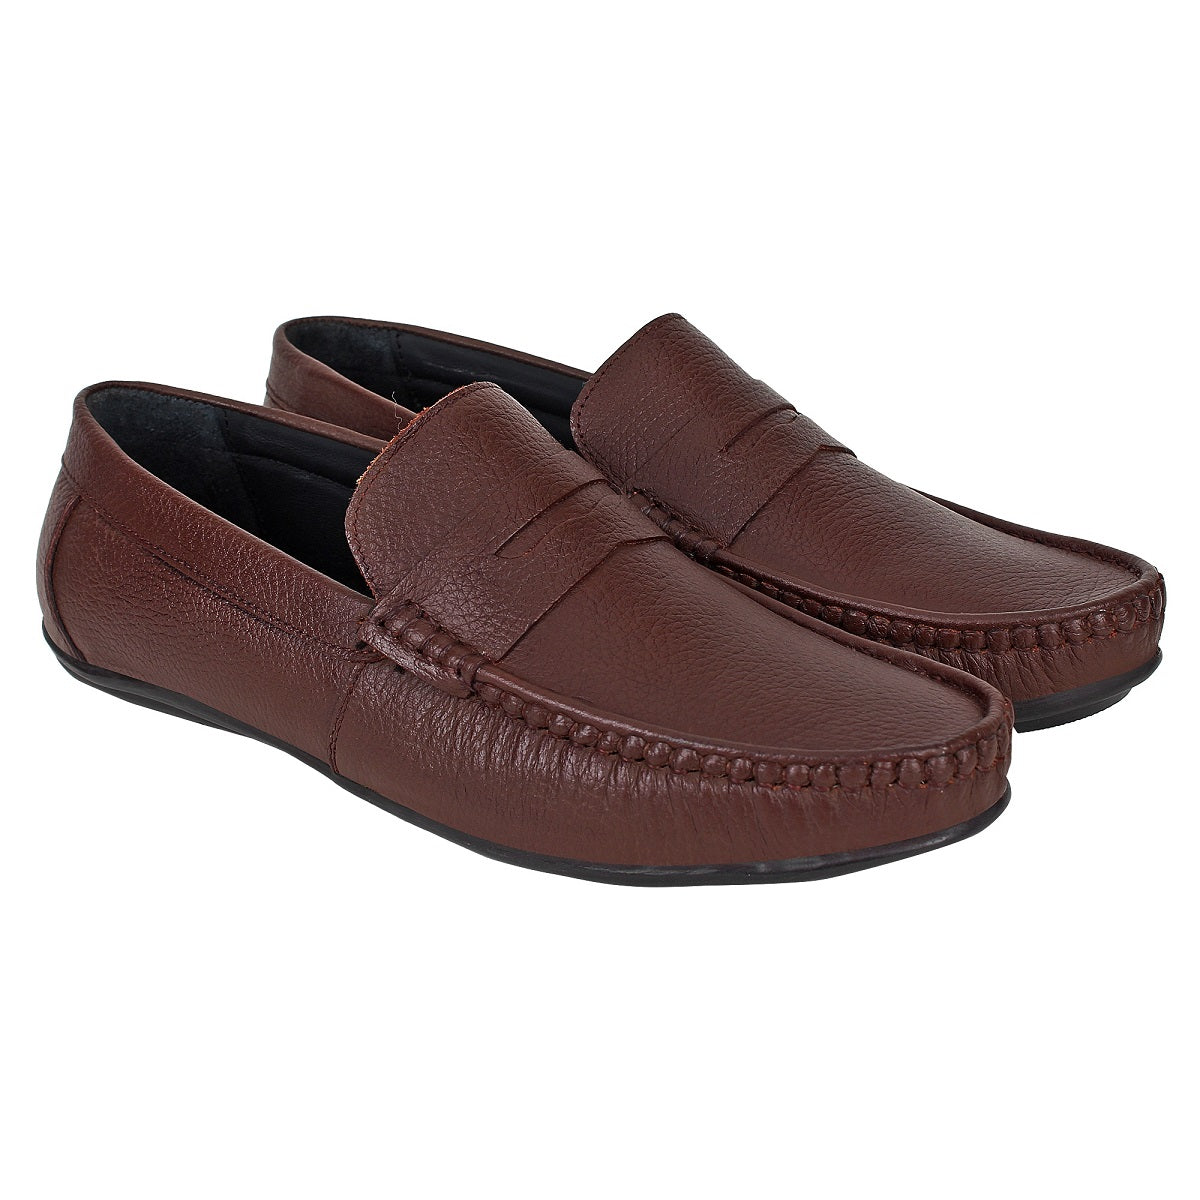 Brown Leather Loafers for Men - Defective